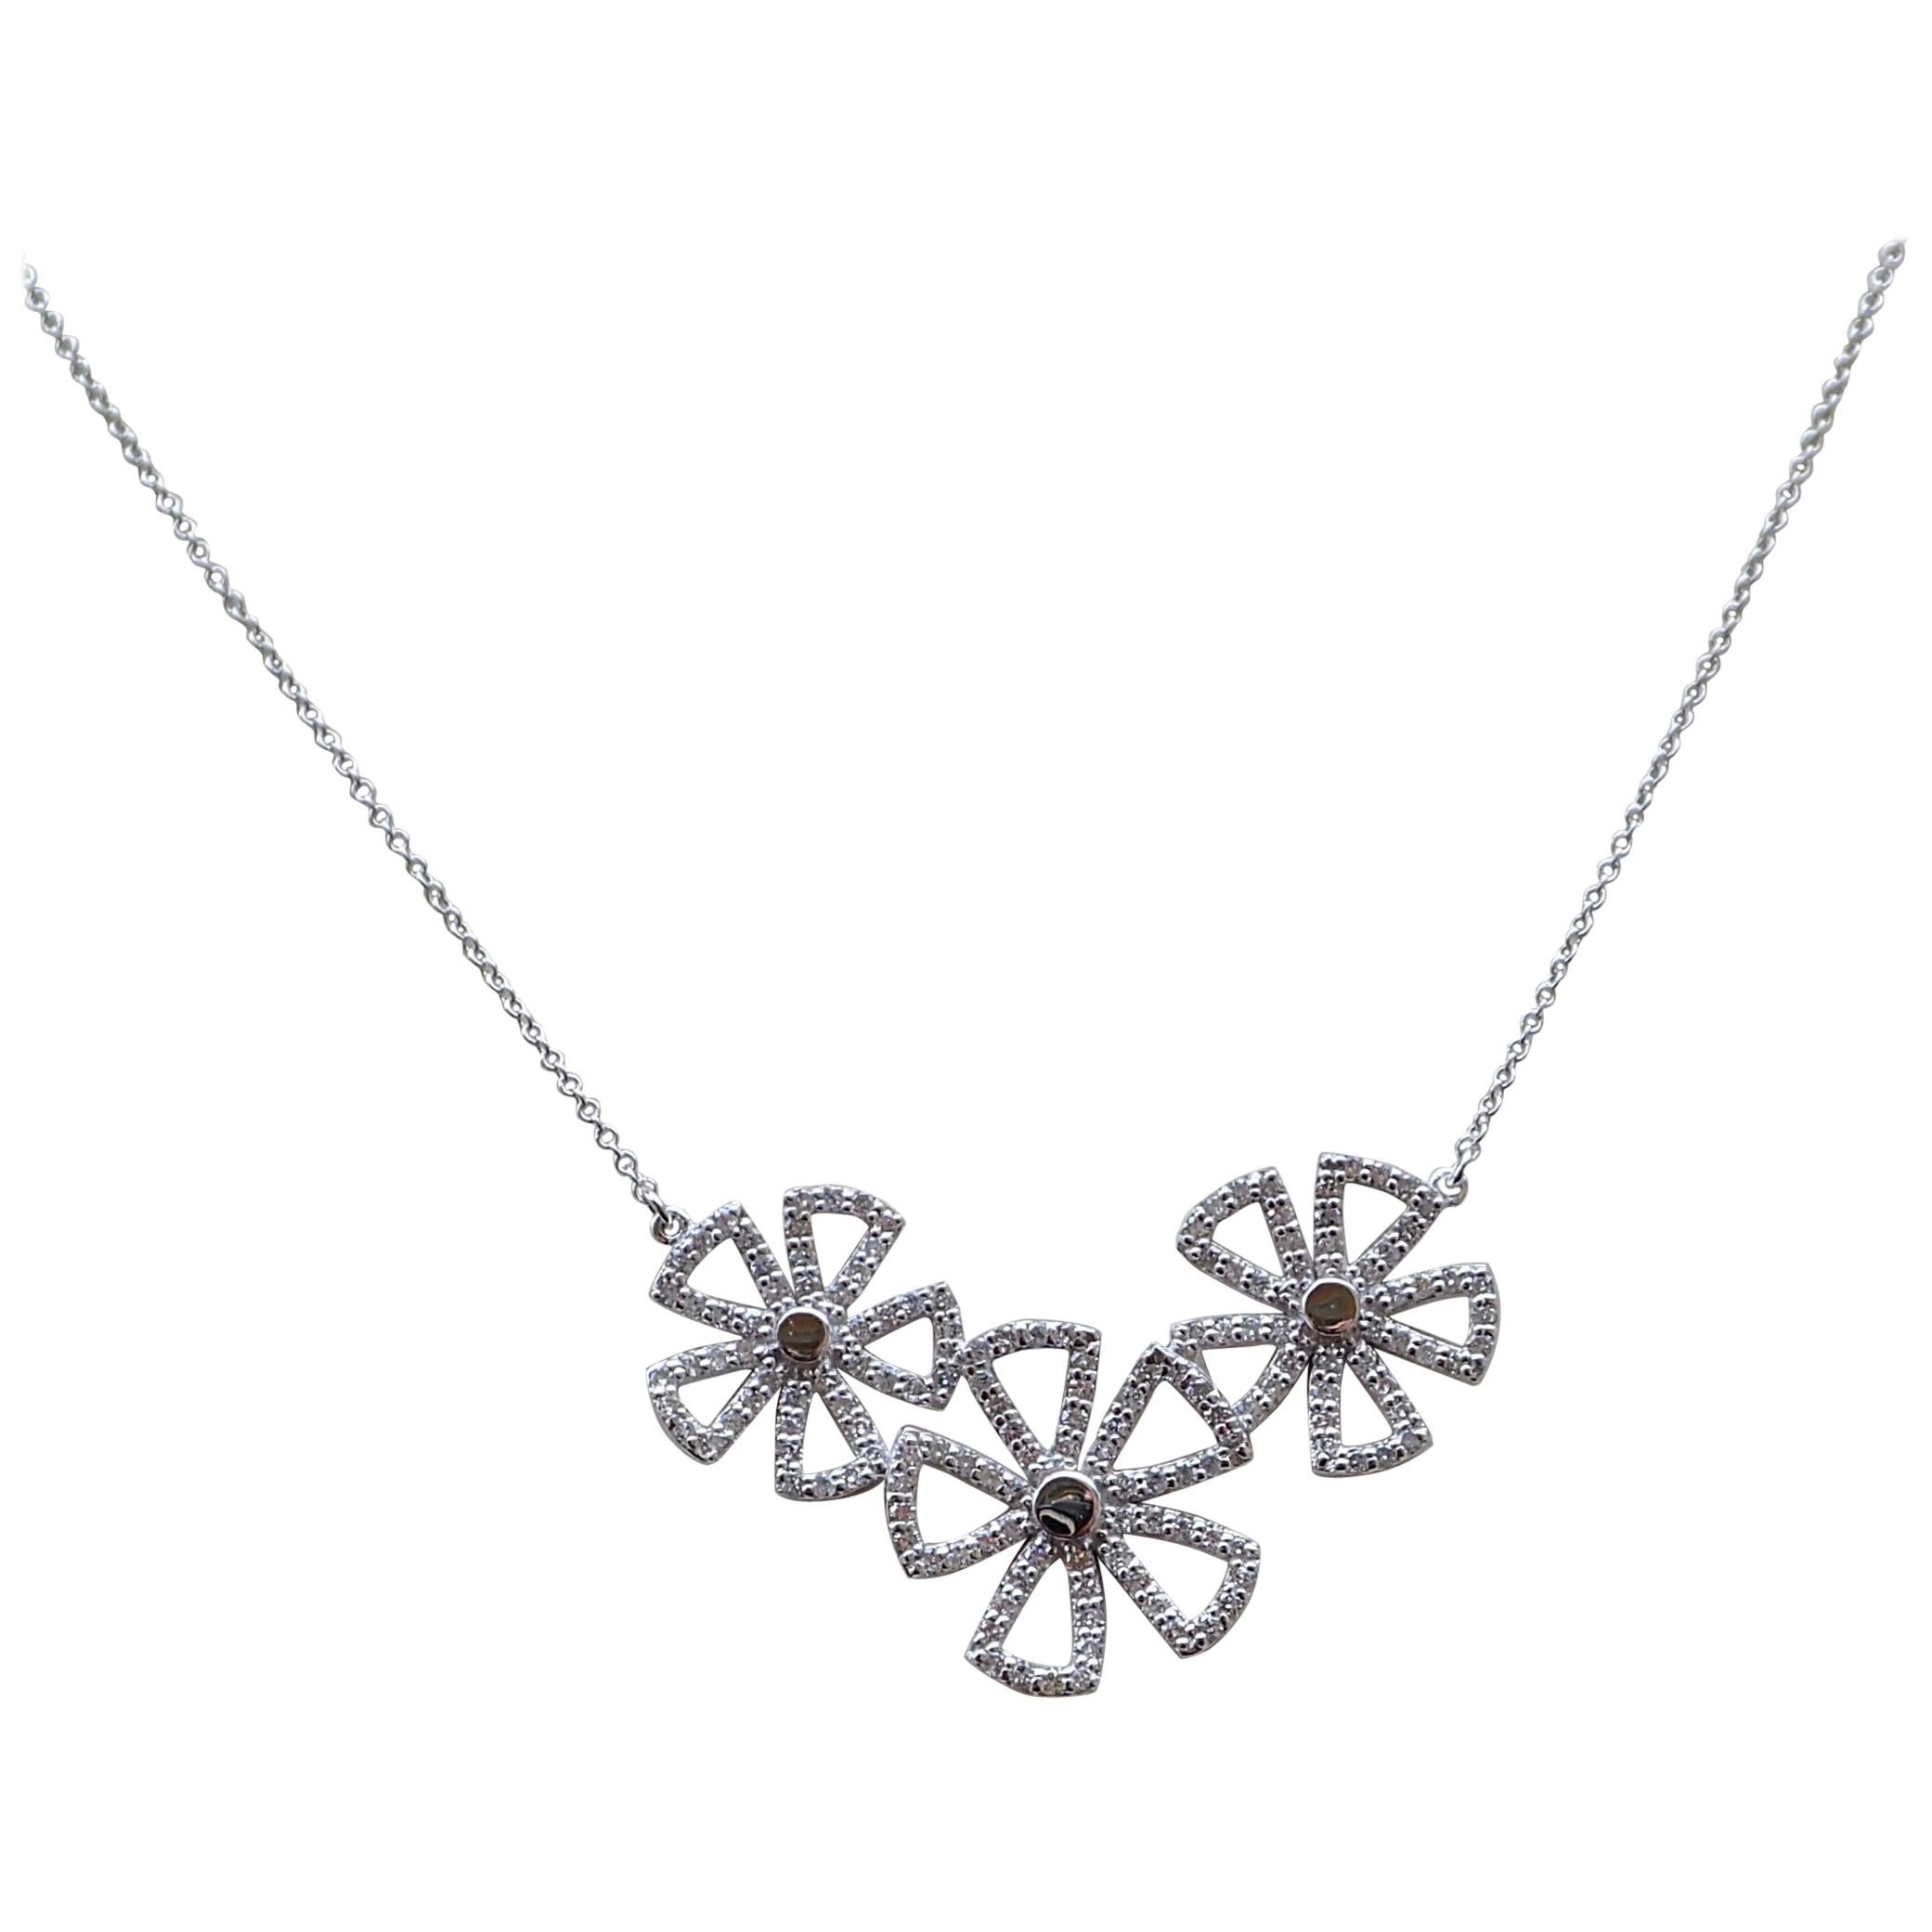 An 18k white gold necklace is 17 1/2” in length and contains a three flower cluster which contains one hundred and fifty-six Round Brilliant Cut diamonds that measure 1.2mm and weigh a total of 1.12 carats with Clarity Grade VS and Color Grade G.